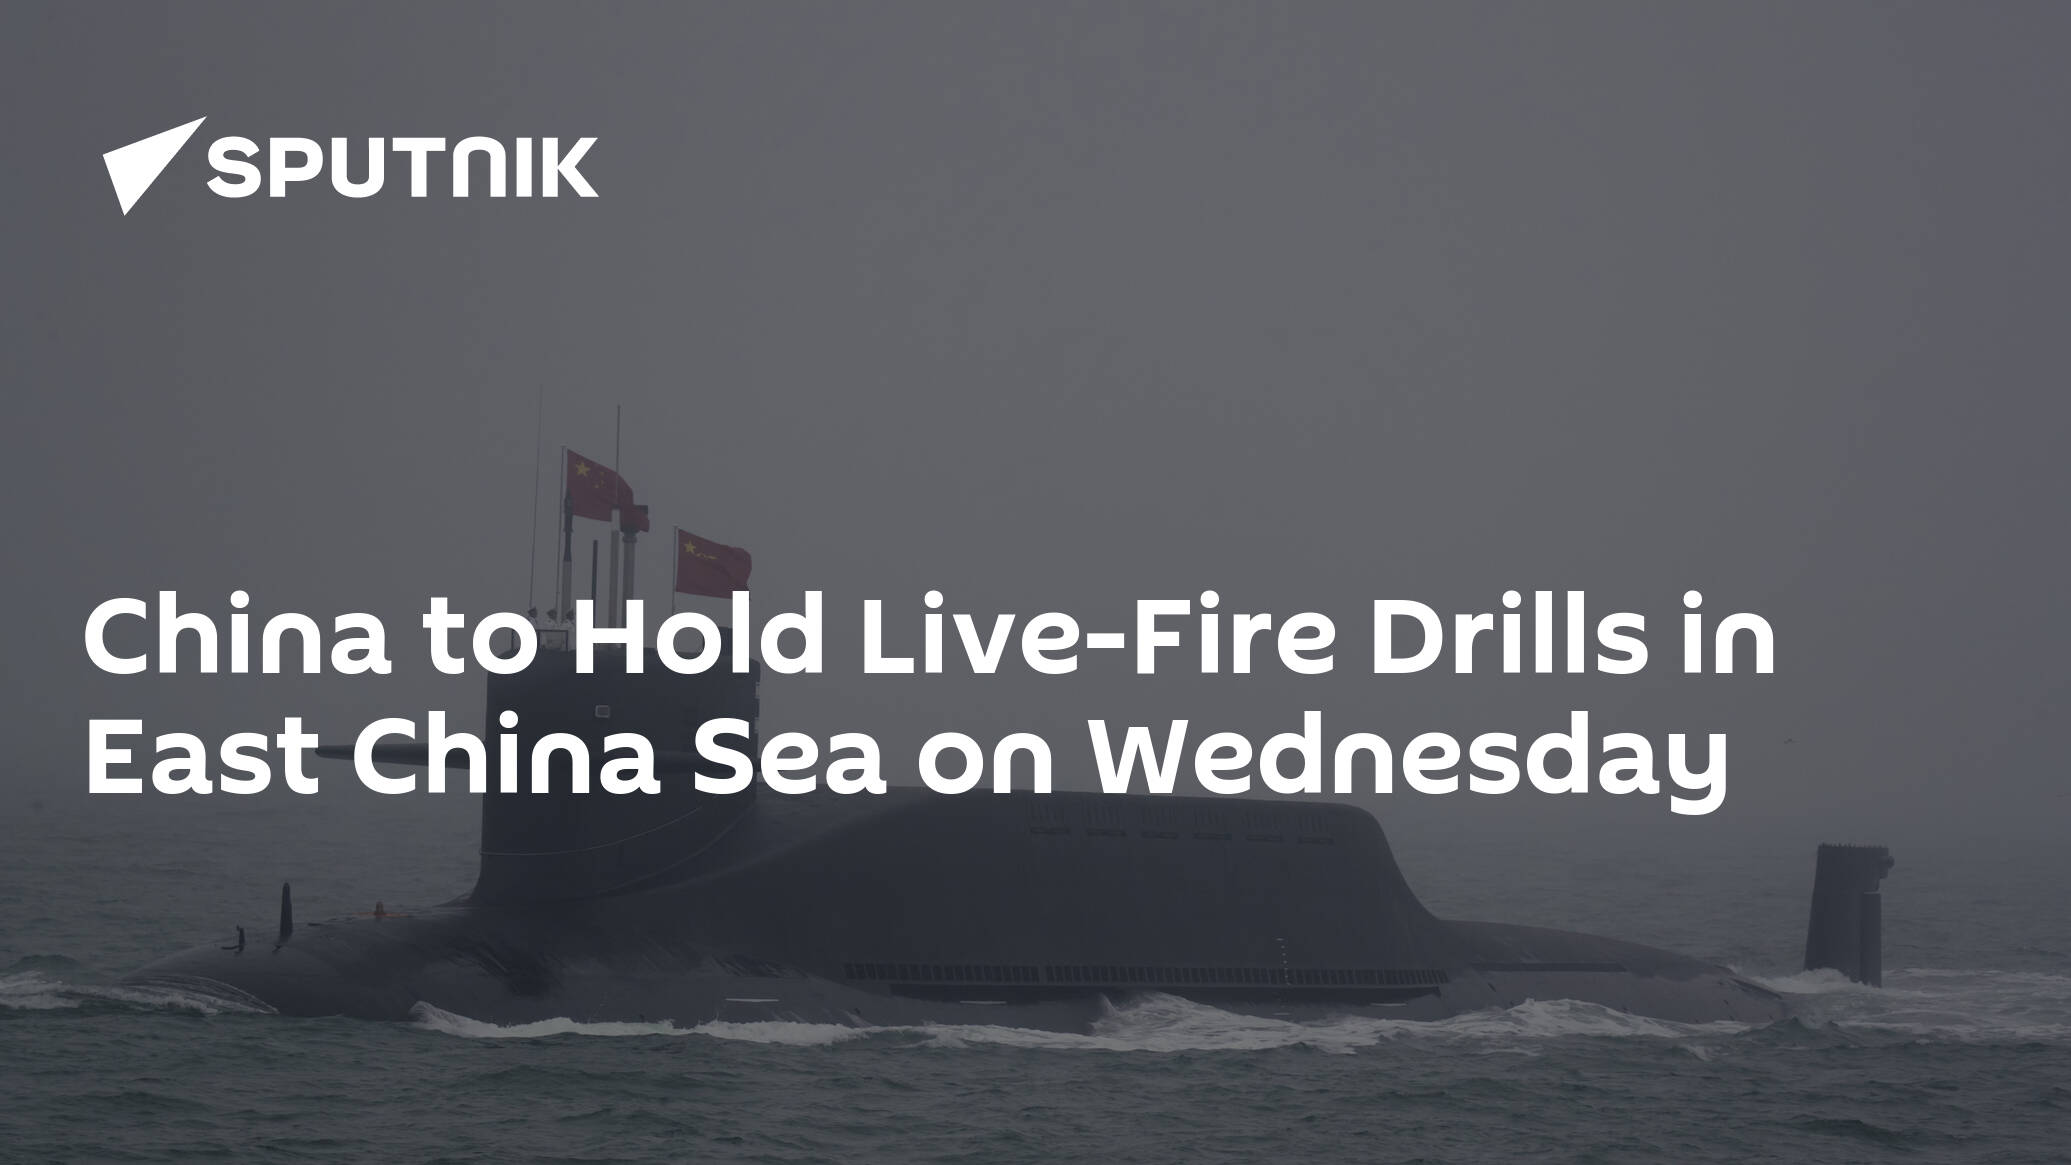 China to Hold Live-Fire Drills in East China Sea on Wednesday